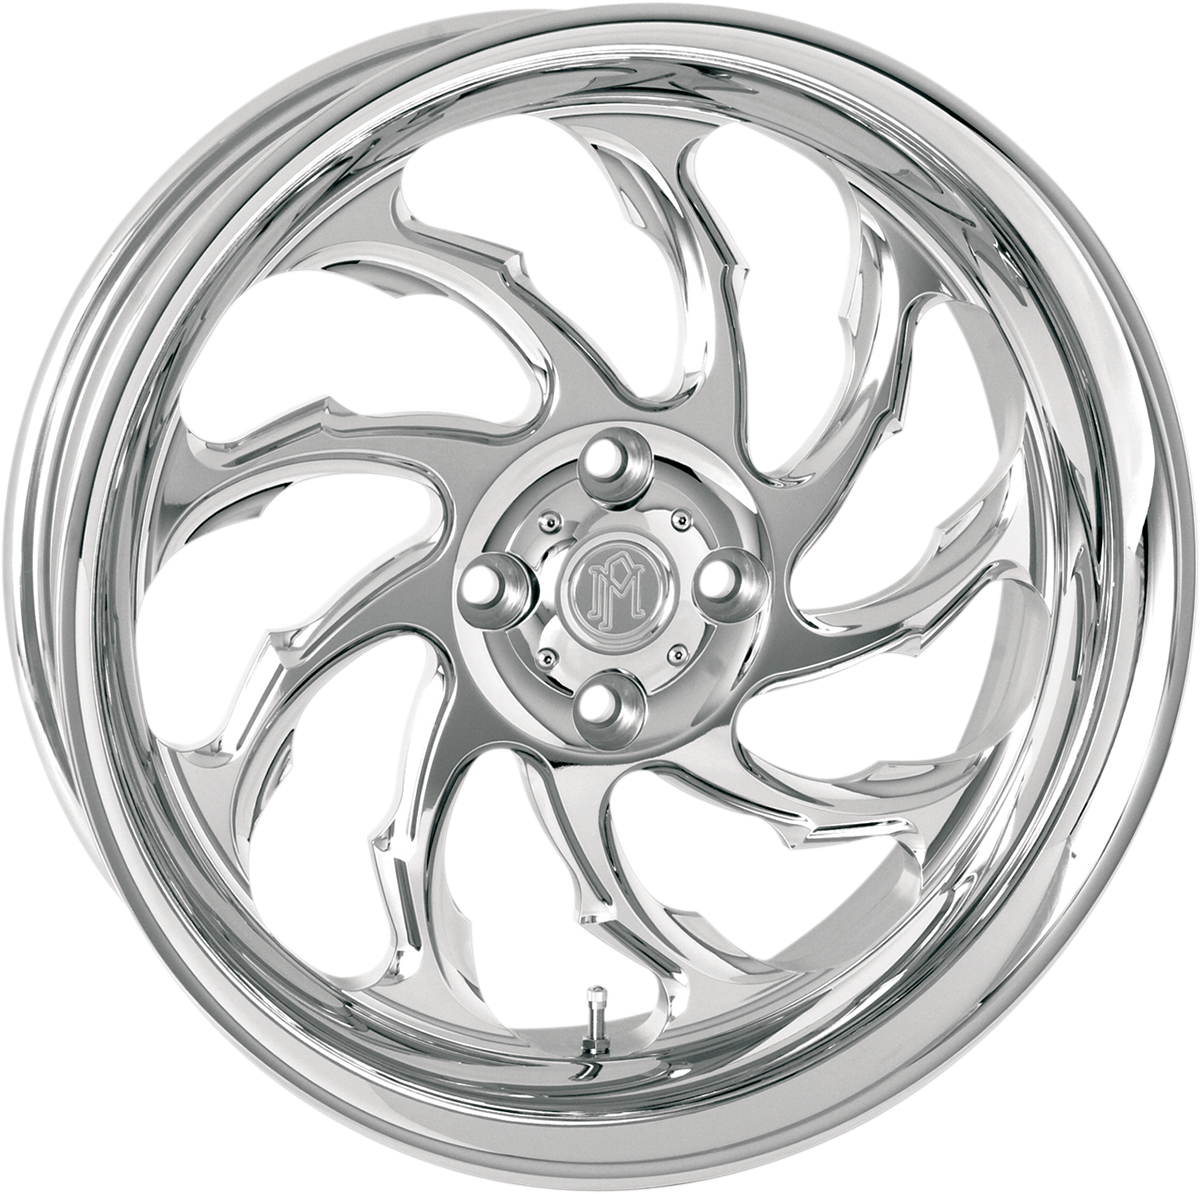 Wheel - Formula - Front/Dual Disc - with ABS - Platinum Cut™ - 21"x3.50" - '08+ FLD